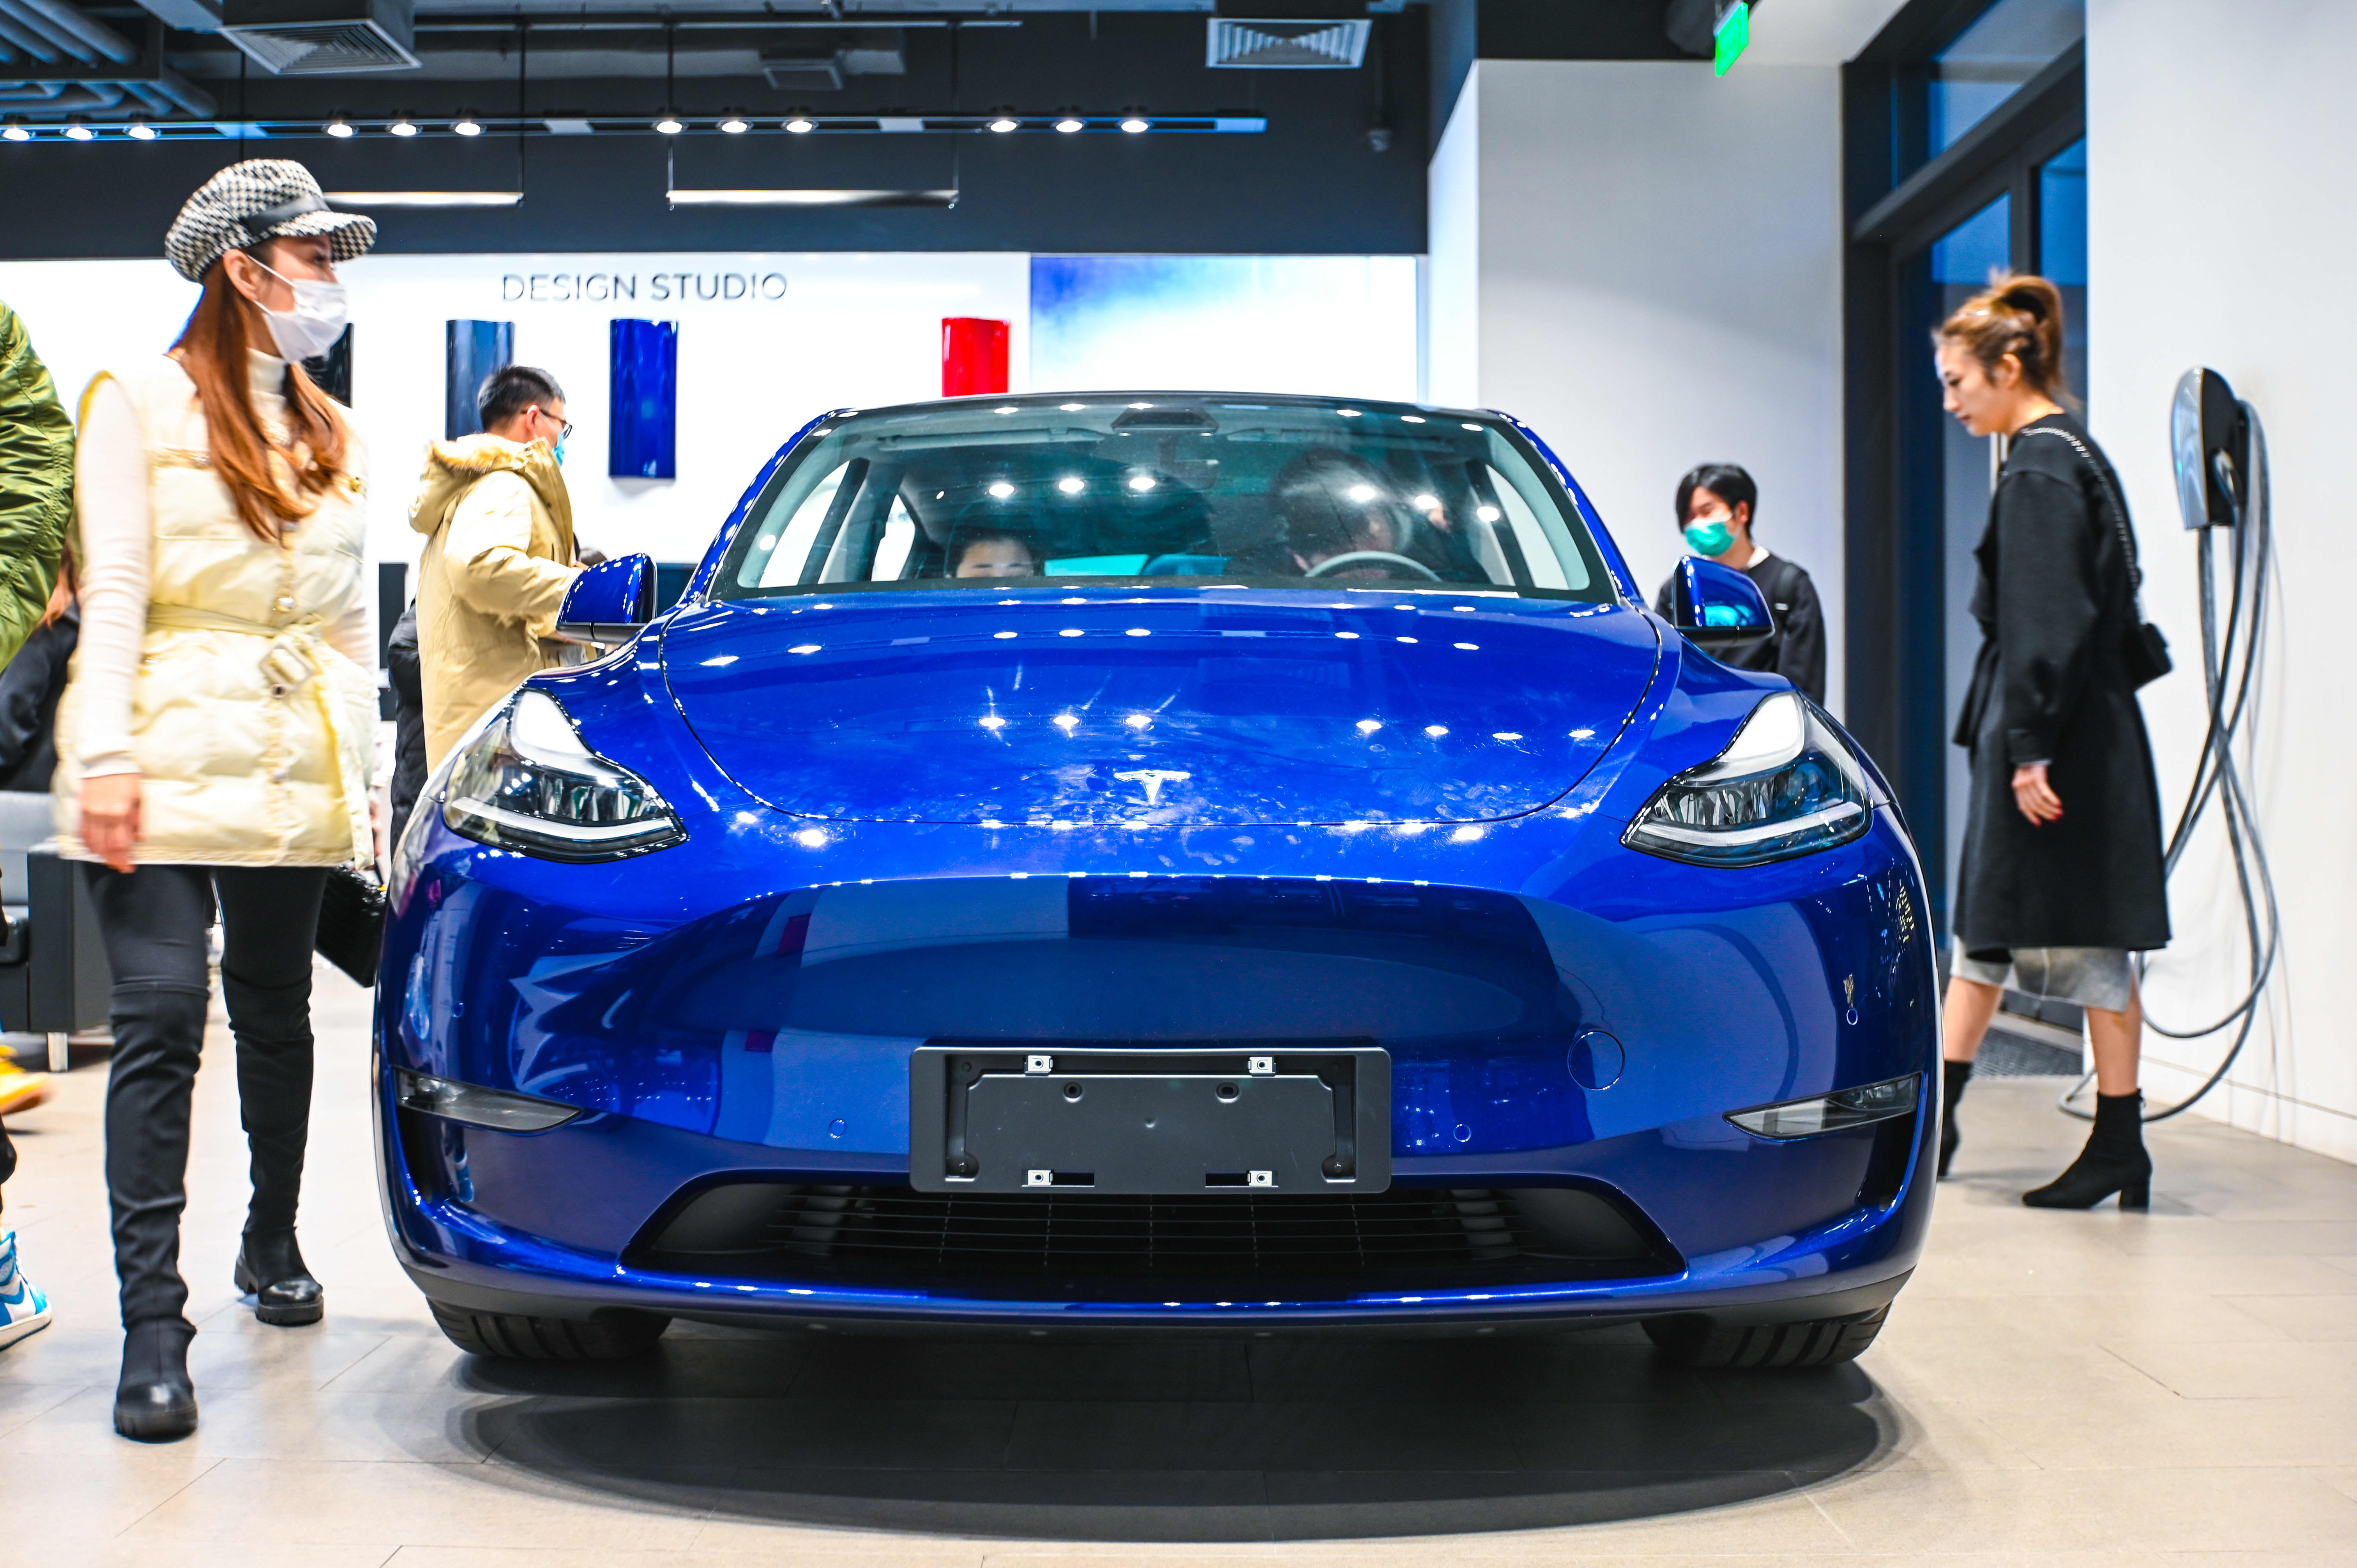 Tesla cars restricted among military personnel in China — report